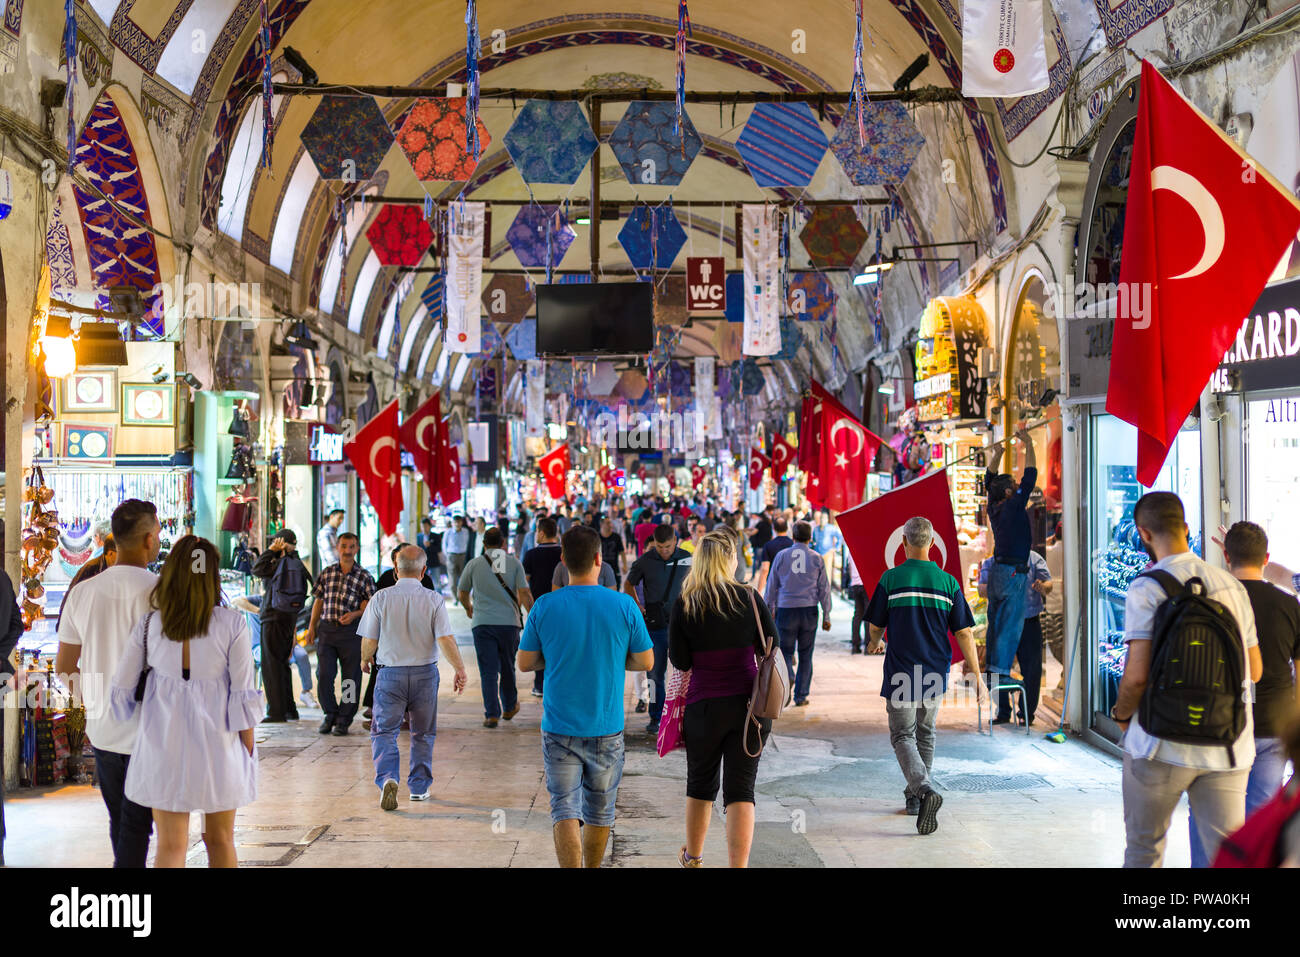 View of the Kapalı Çarşı or Grand Bazaar interior with people browsing items at the various small shops, Istanbul, Turkey Stock Photo